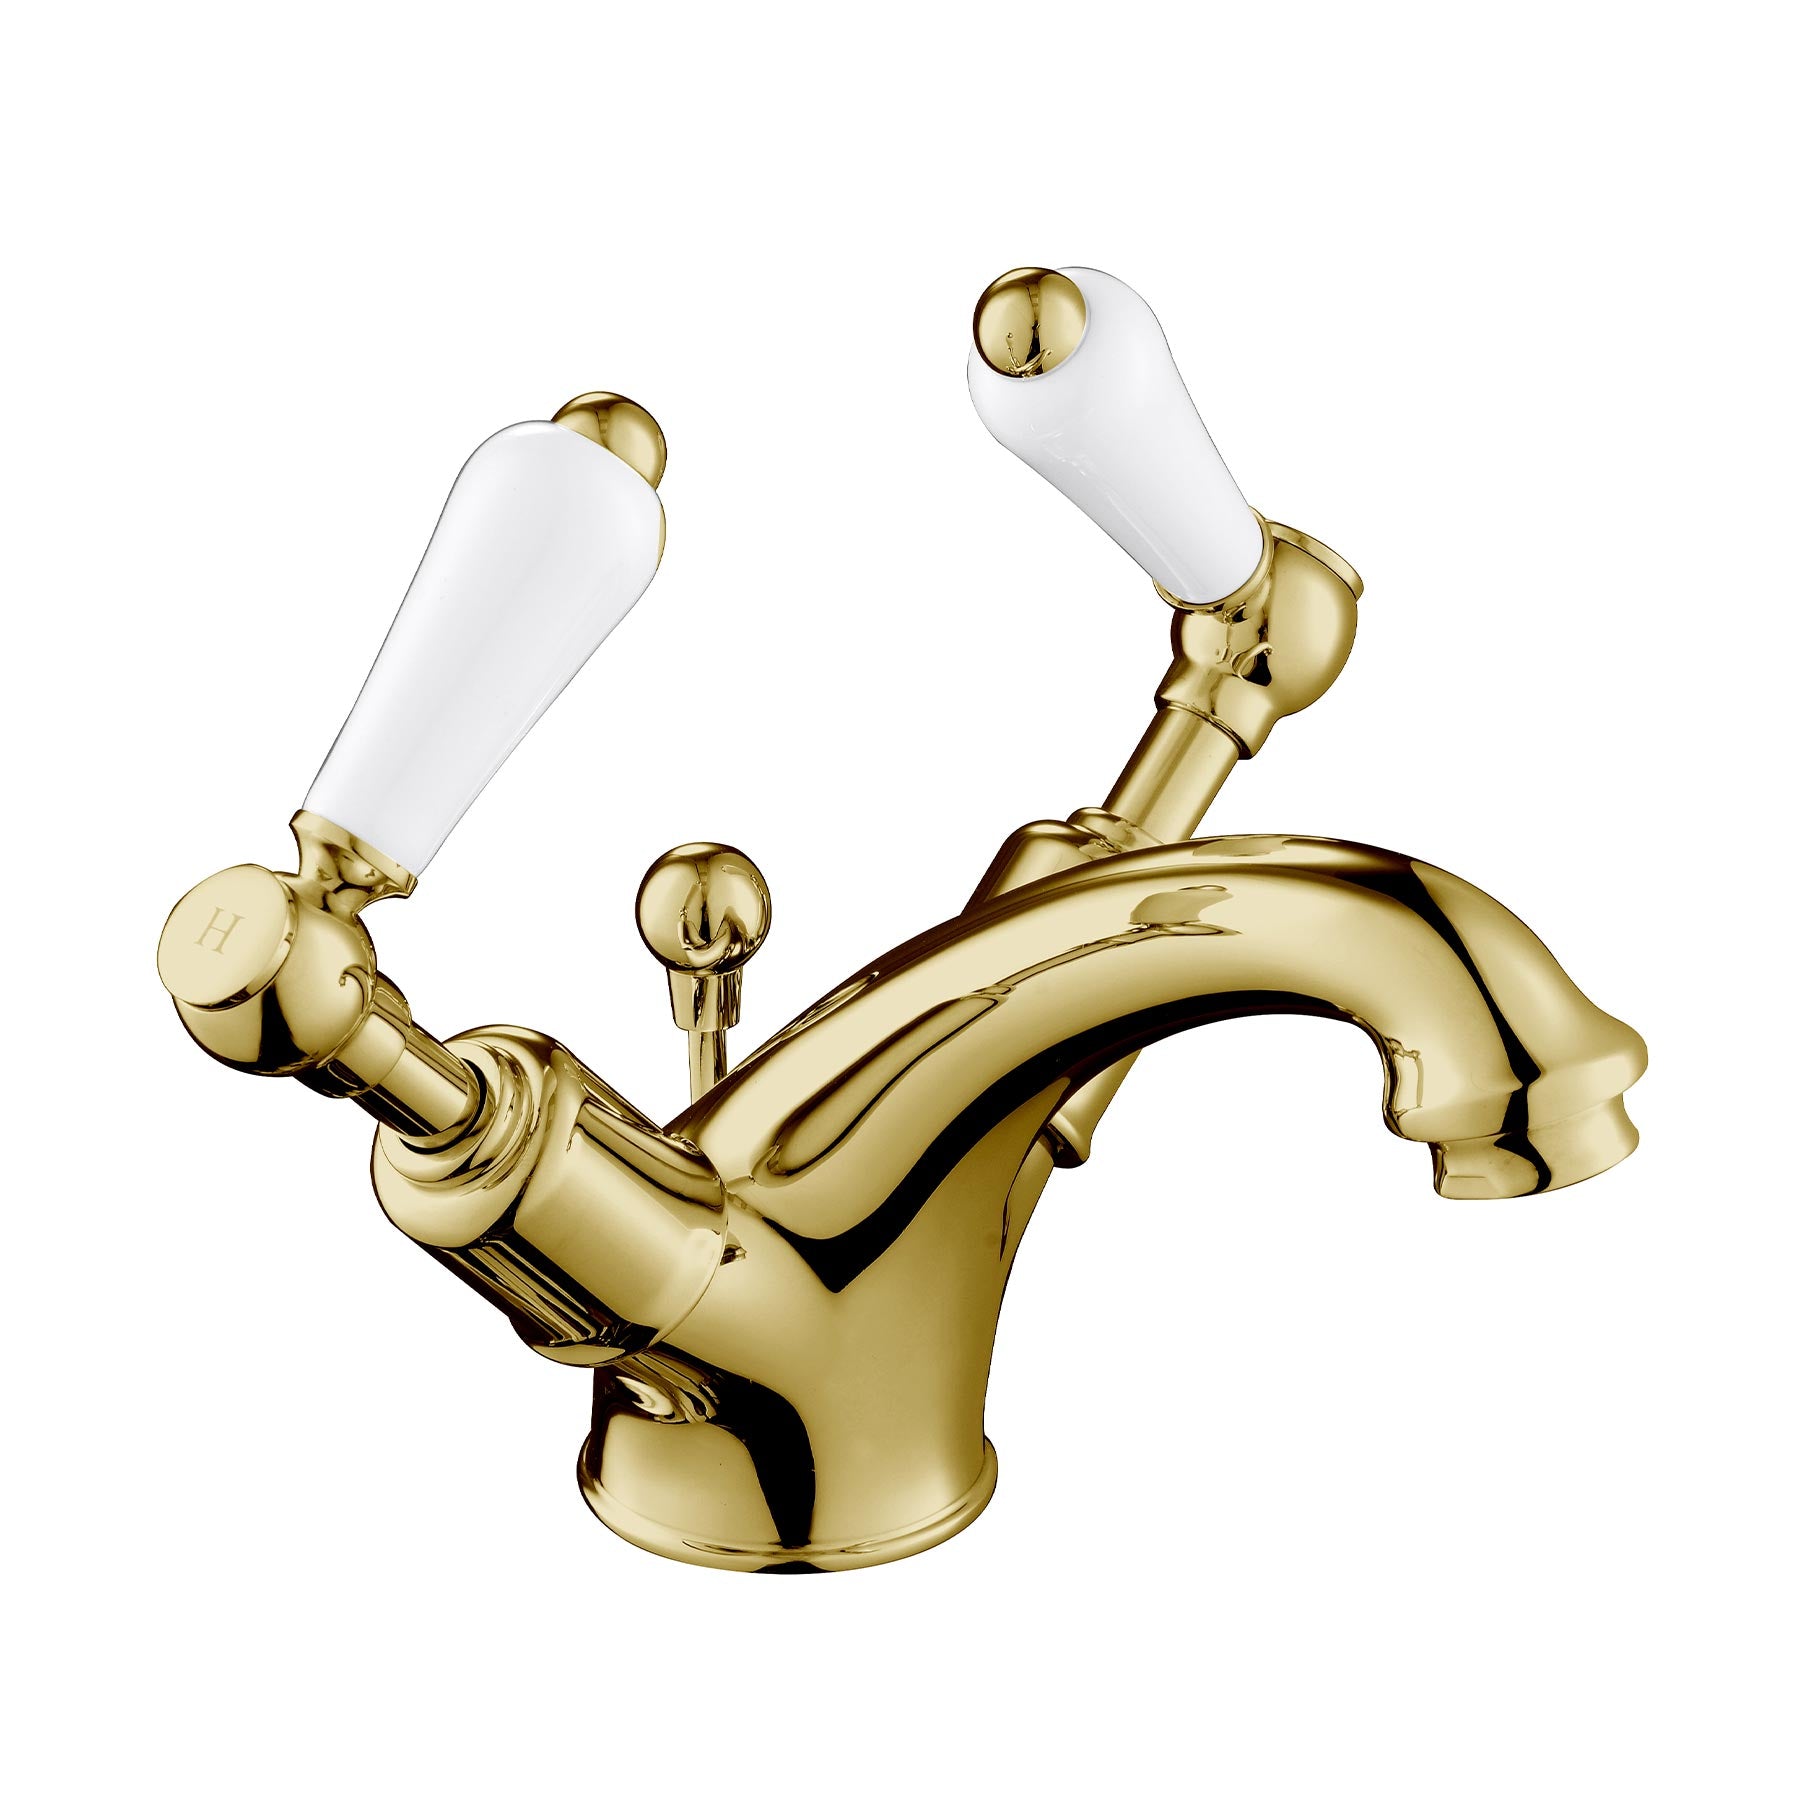 Gold-Mixer-Taps-With-Pop-Up-Waste